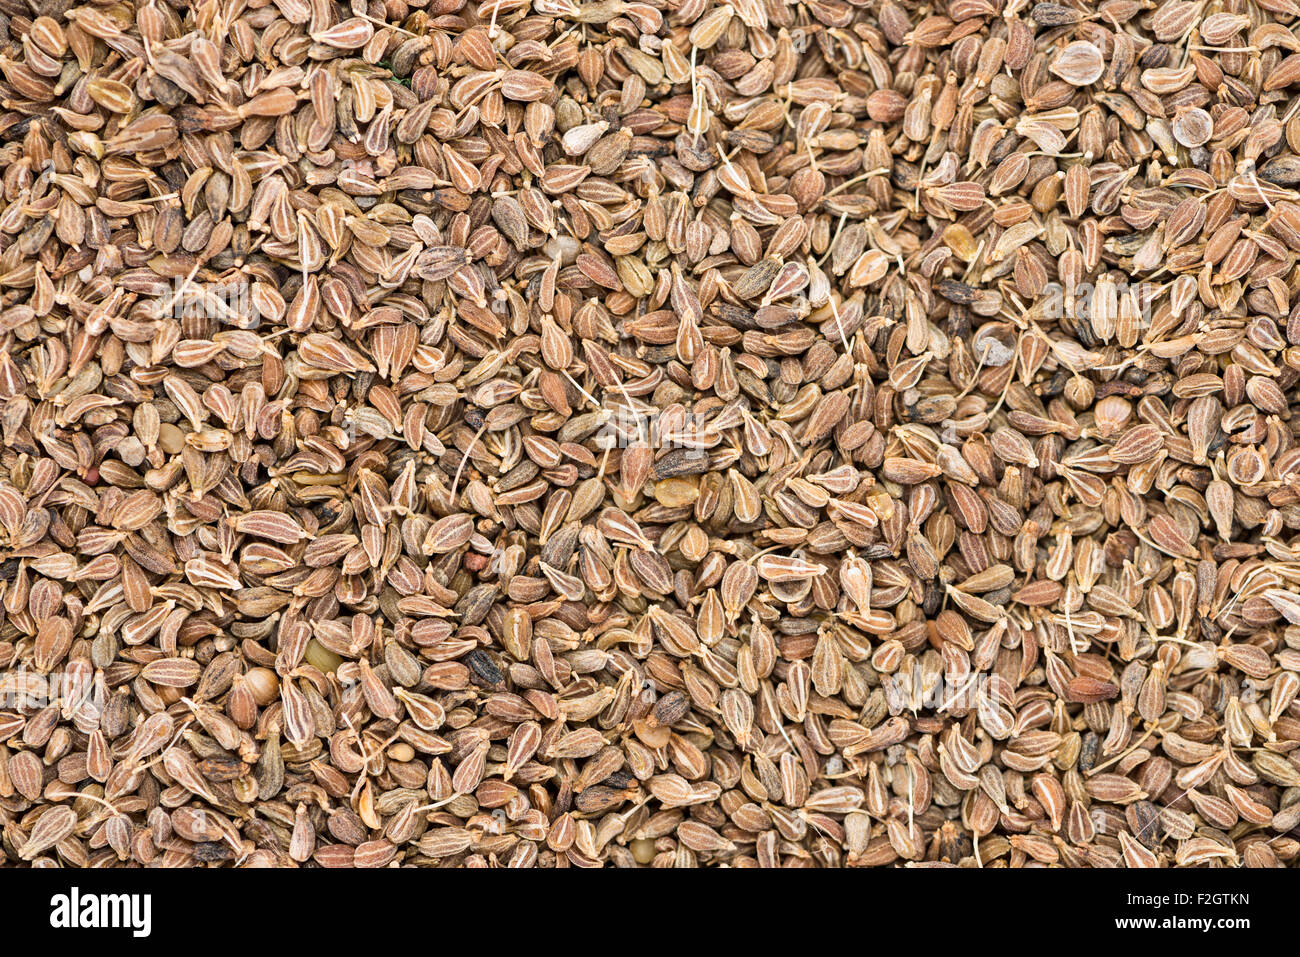 Portion of dried Anissed as close-up shot for background or texture use Stock Photo